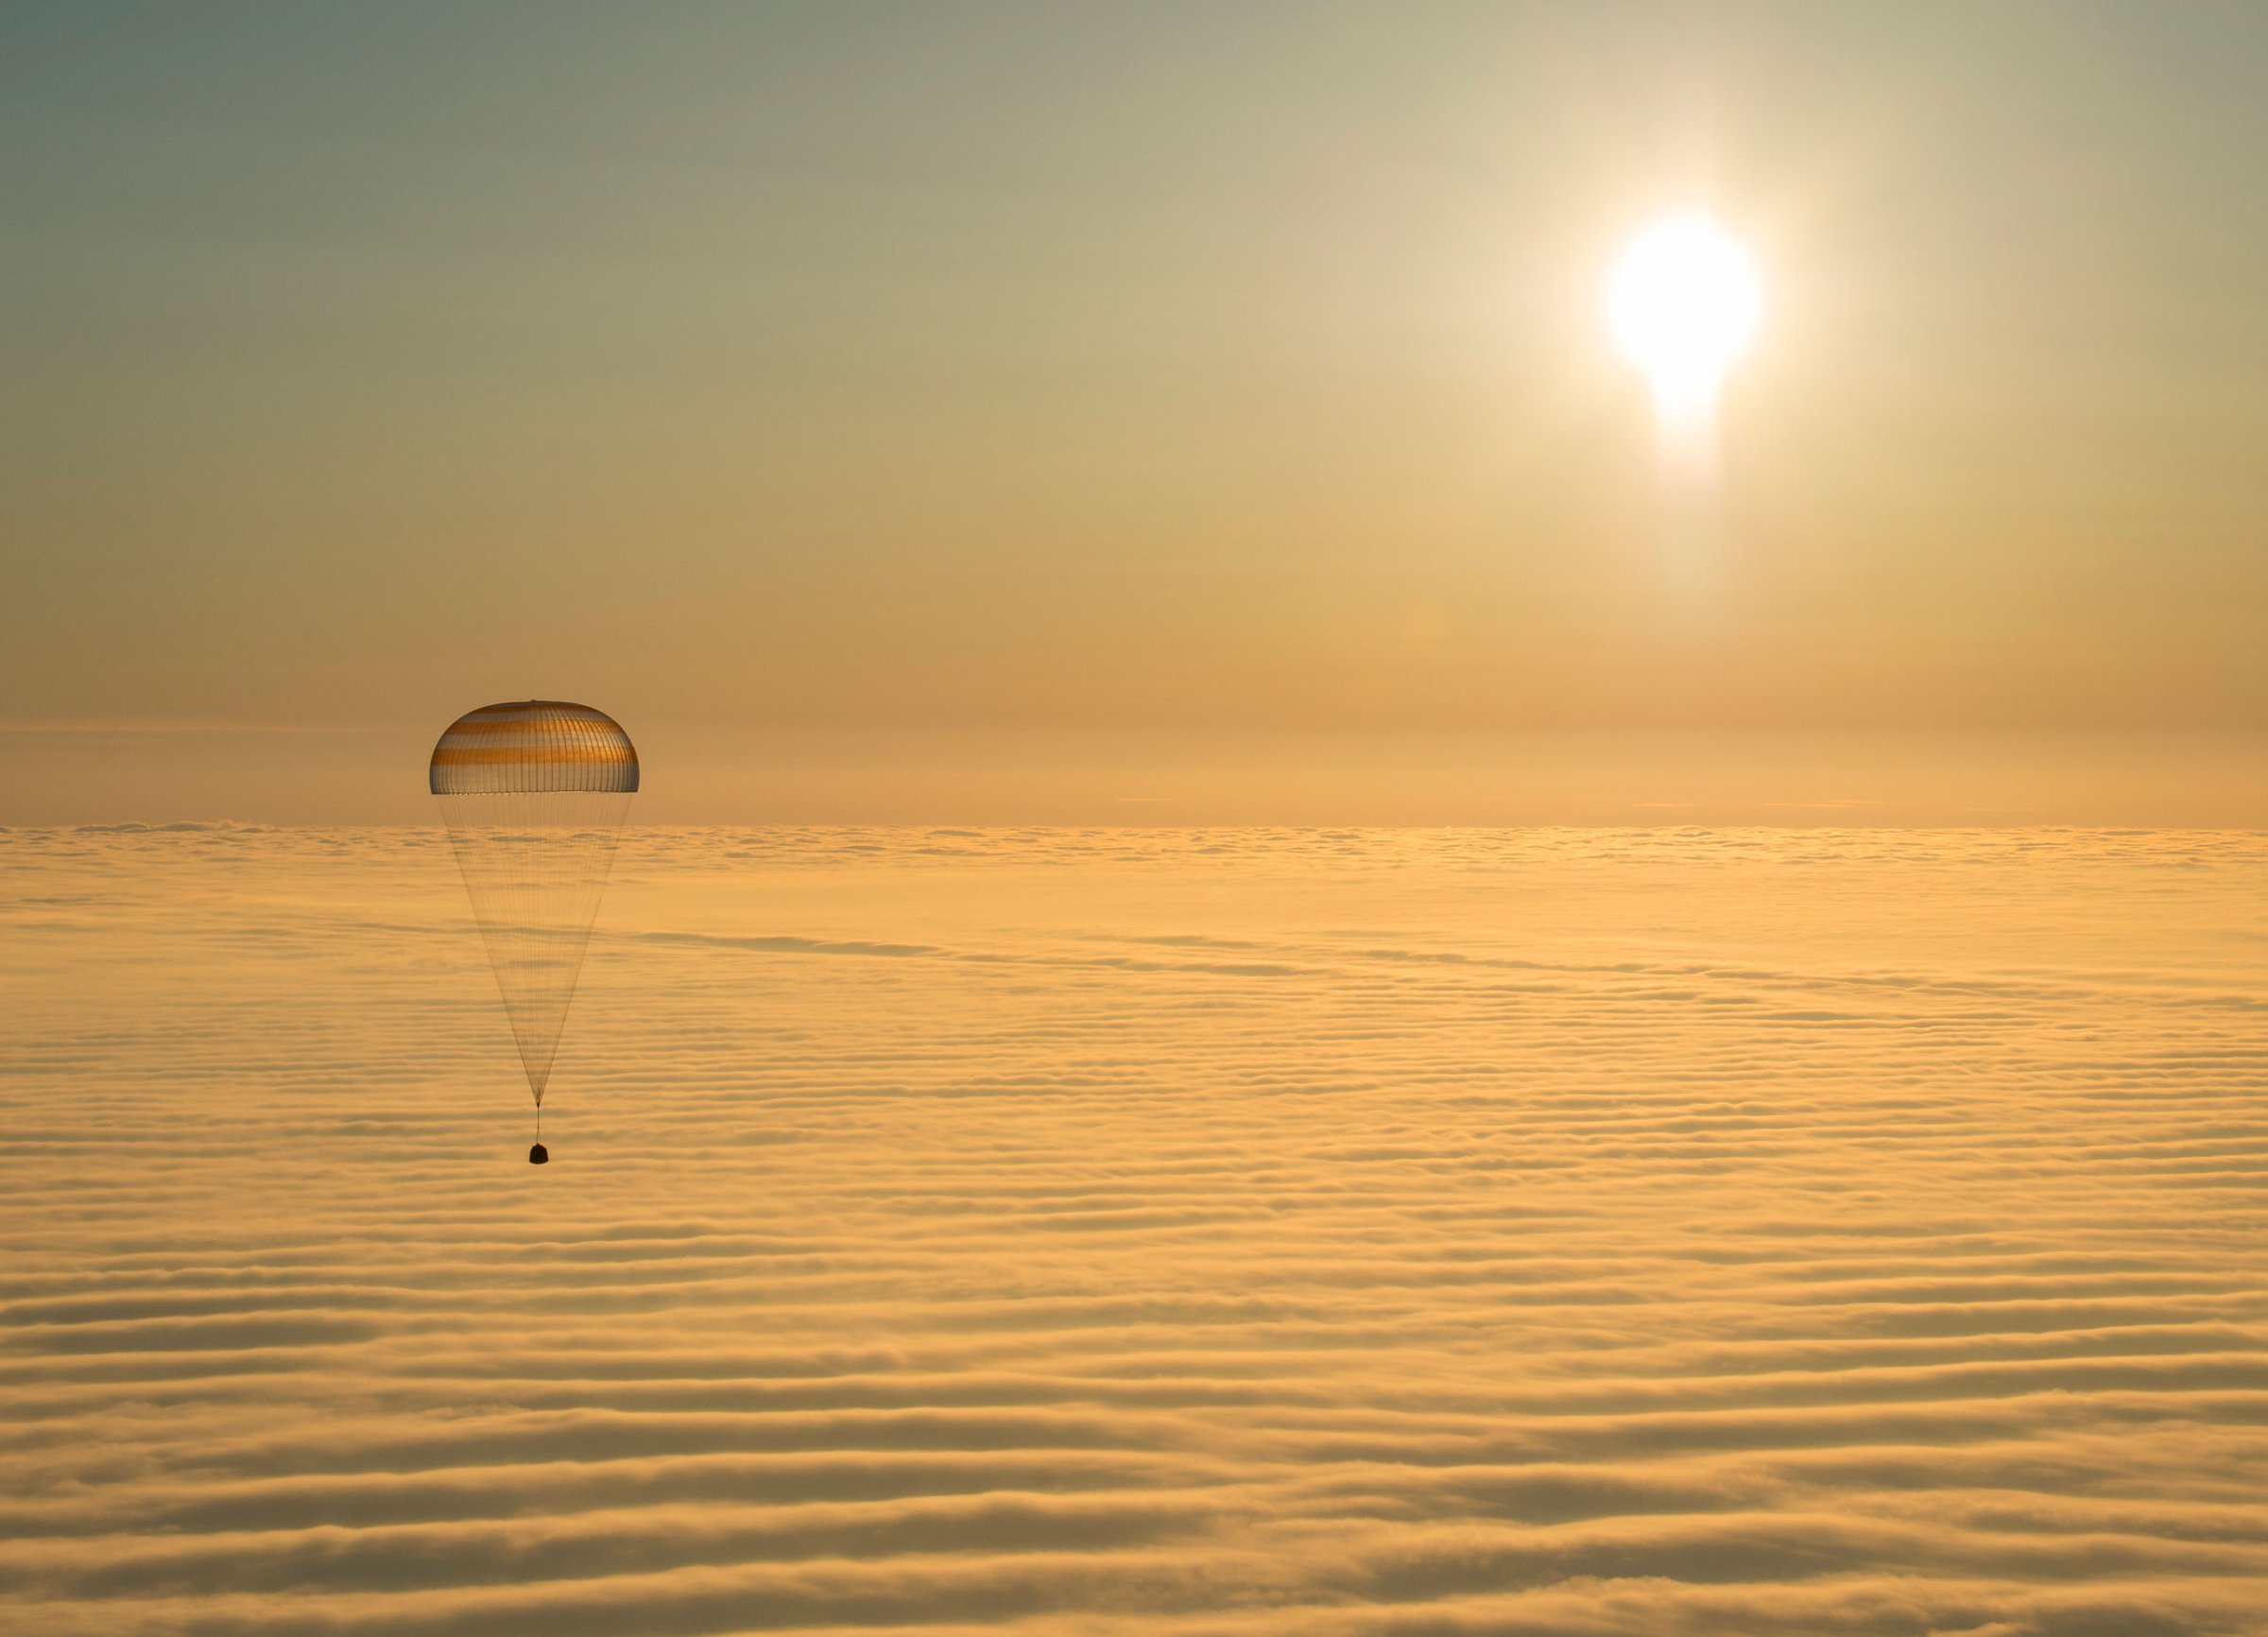 The Soyuz TMA-14M spacecraft as it lands with Expedition 42 commander Barry Wilmore of NASA, Alexander Samokutyaev of the Russian Federal Space Agency (Roscosmos) and Elena Serova of Roscosmos near the town of Zhezkazgan, Kazakhstan on March 12, 2015.